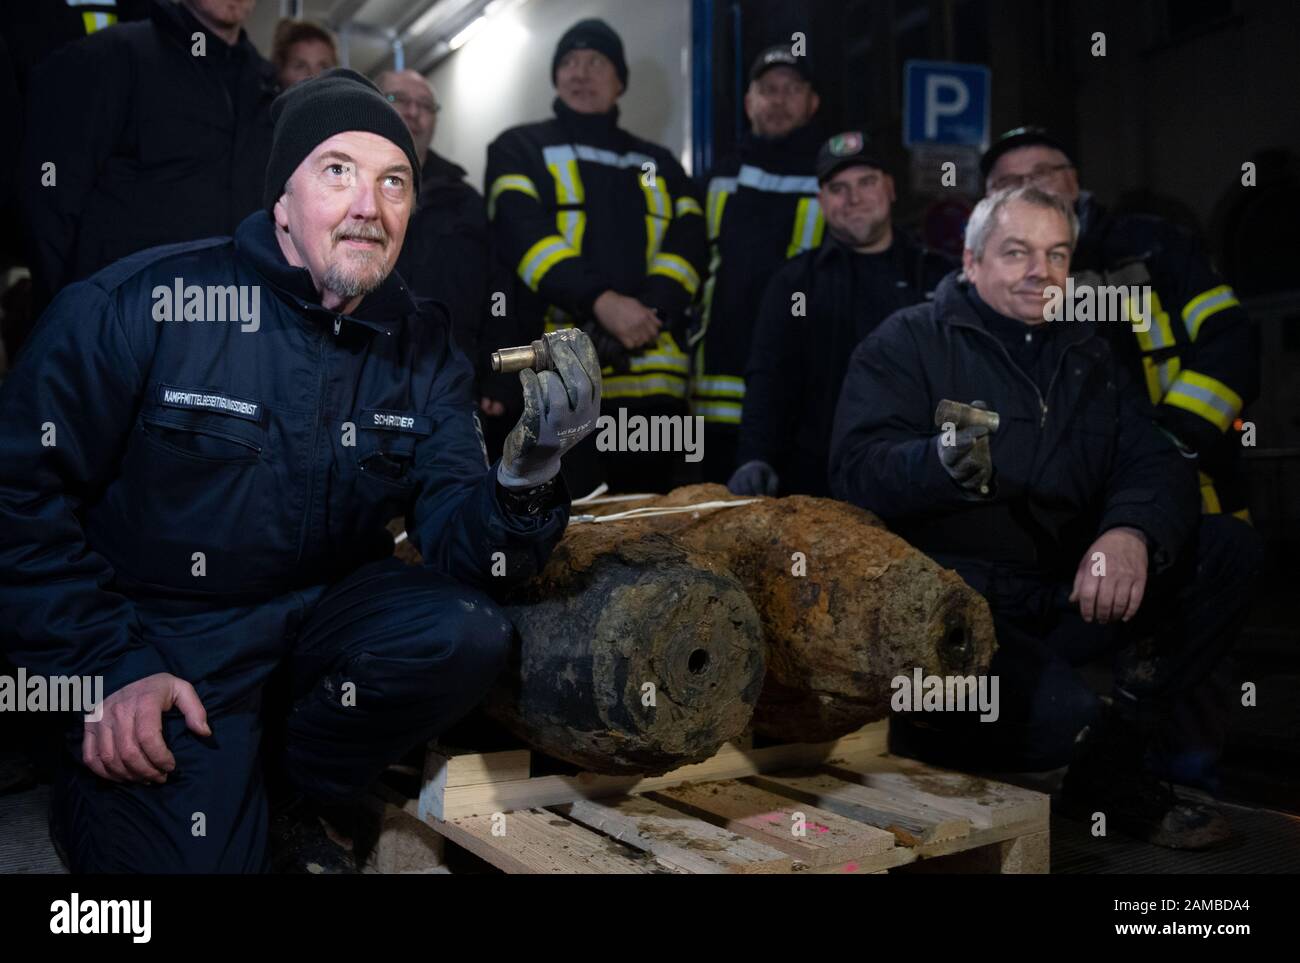 Dortmund, Germany. 12th Jan, 2020. Bomb disposal expert Karl-Friedrich Schröder (l) and his team show the detonator of a defused bomb. The two bombs found from the Second World War have been defused. No unexploded ordnance had been detected at two other suspected sites. The aircraft bombs were located in a densely populated residential area. As a result, some 14 000 people had to leave their homes. Credit: Bernd Thissen/dpa/Alamy Live News Stock Photo